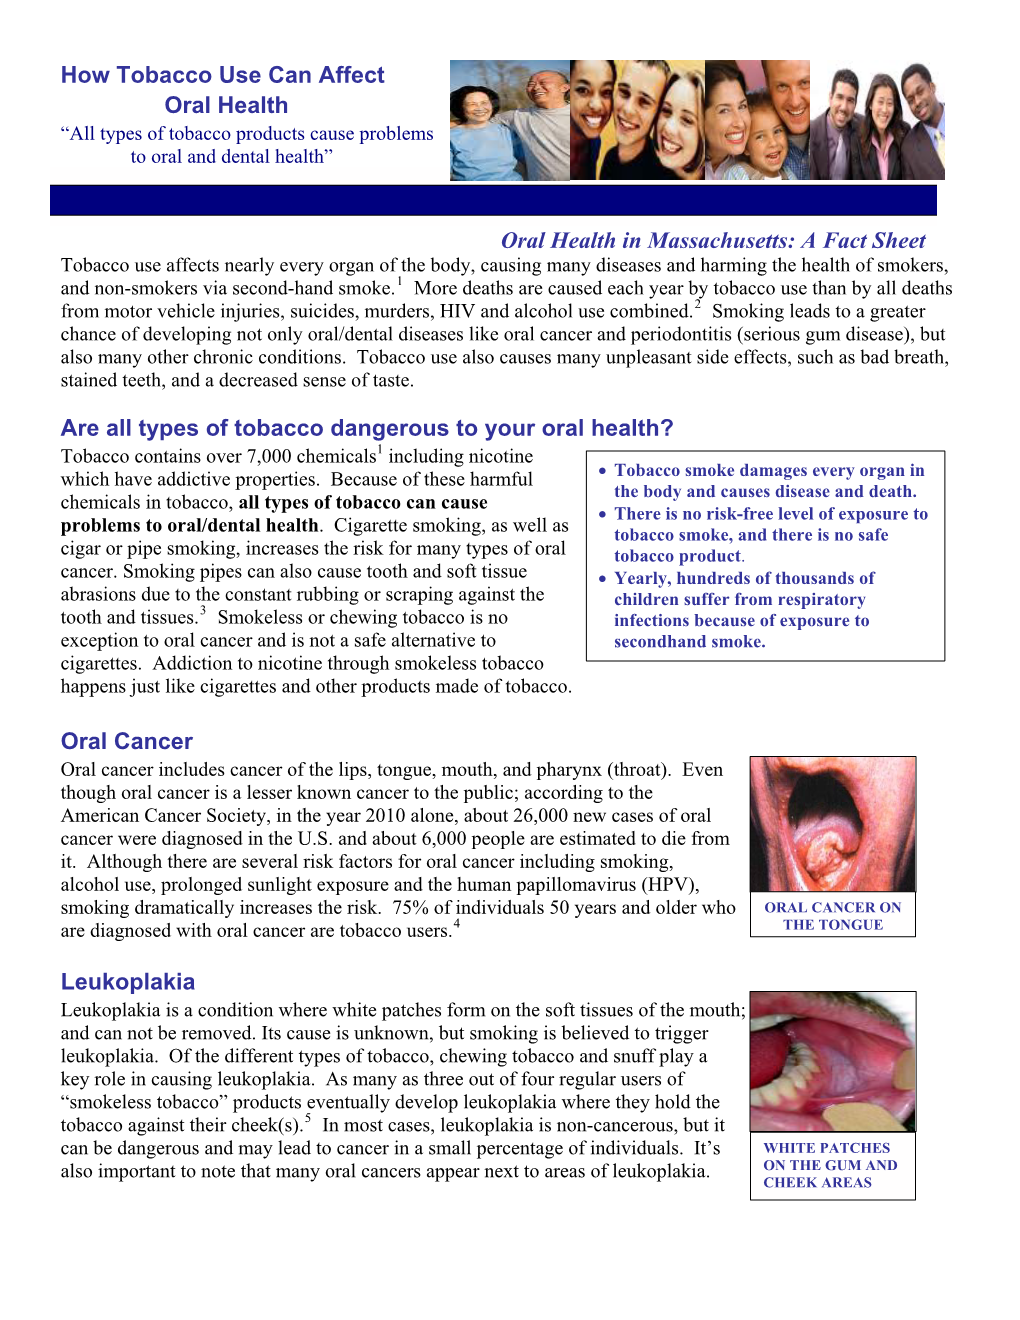 How Tobacco Use Can Affect Oral Health “All Types of Tobacco Products Cause Problems to Oral and Dental Health”